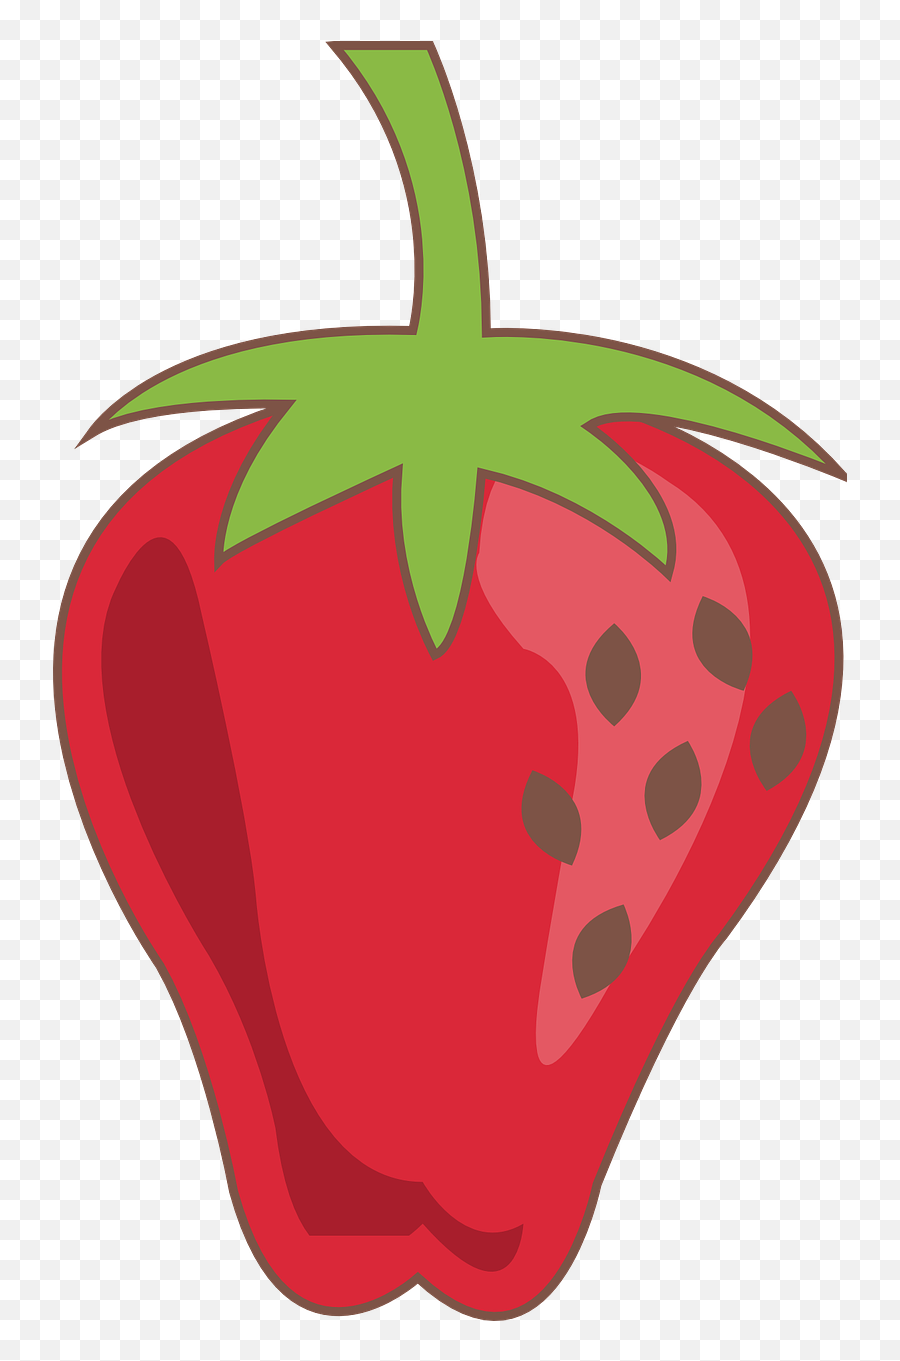 Download Free Photo Of Strawberryfruitcateringfree Vector Emoji,Caterer Clipart